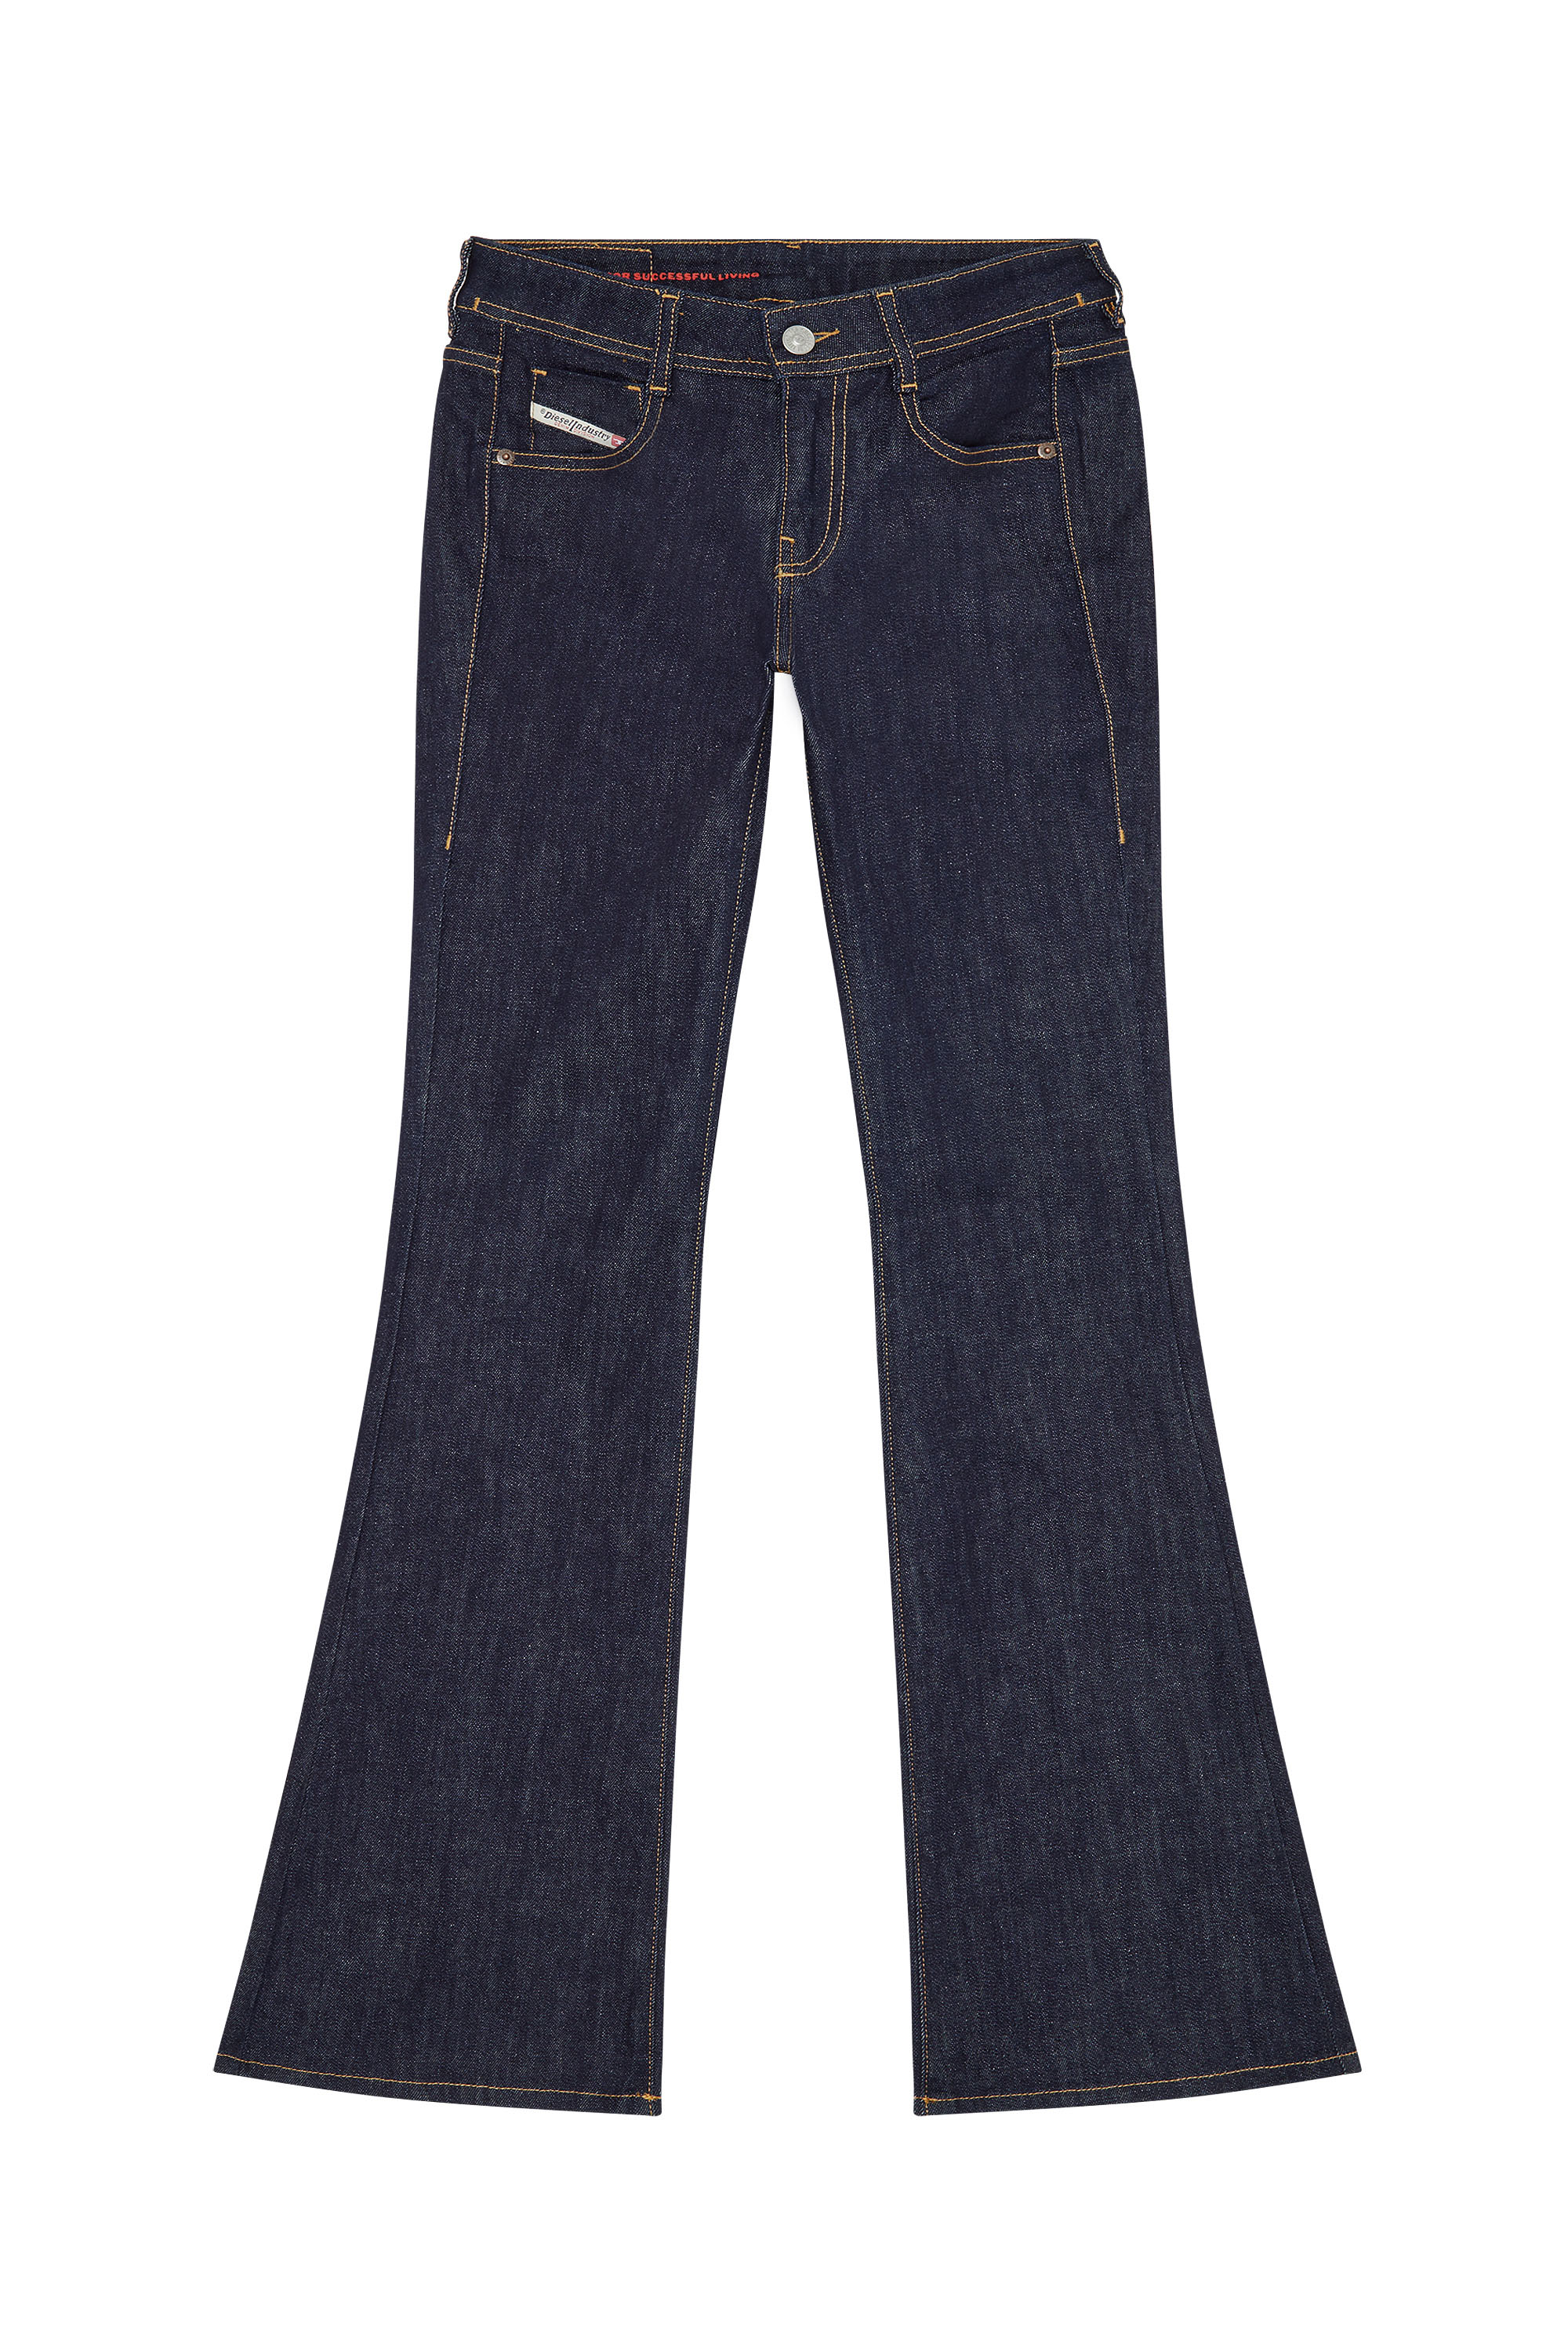 1969 D-EBBEY Z9B89 Bootcut and Flare Jeans, Dark Blue - Jeans